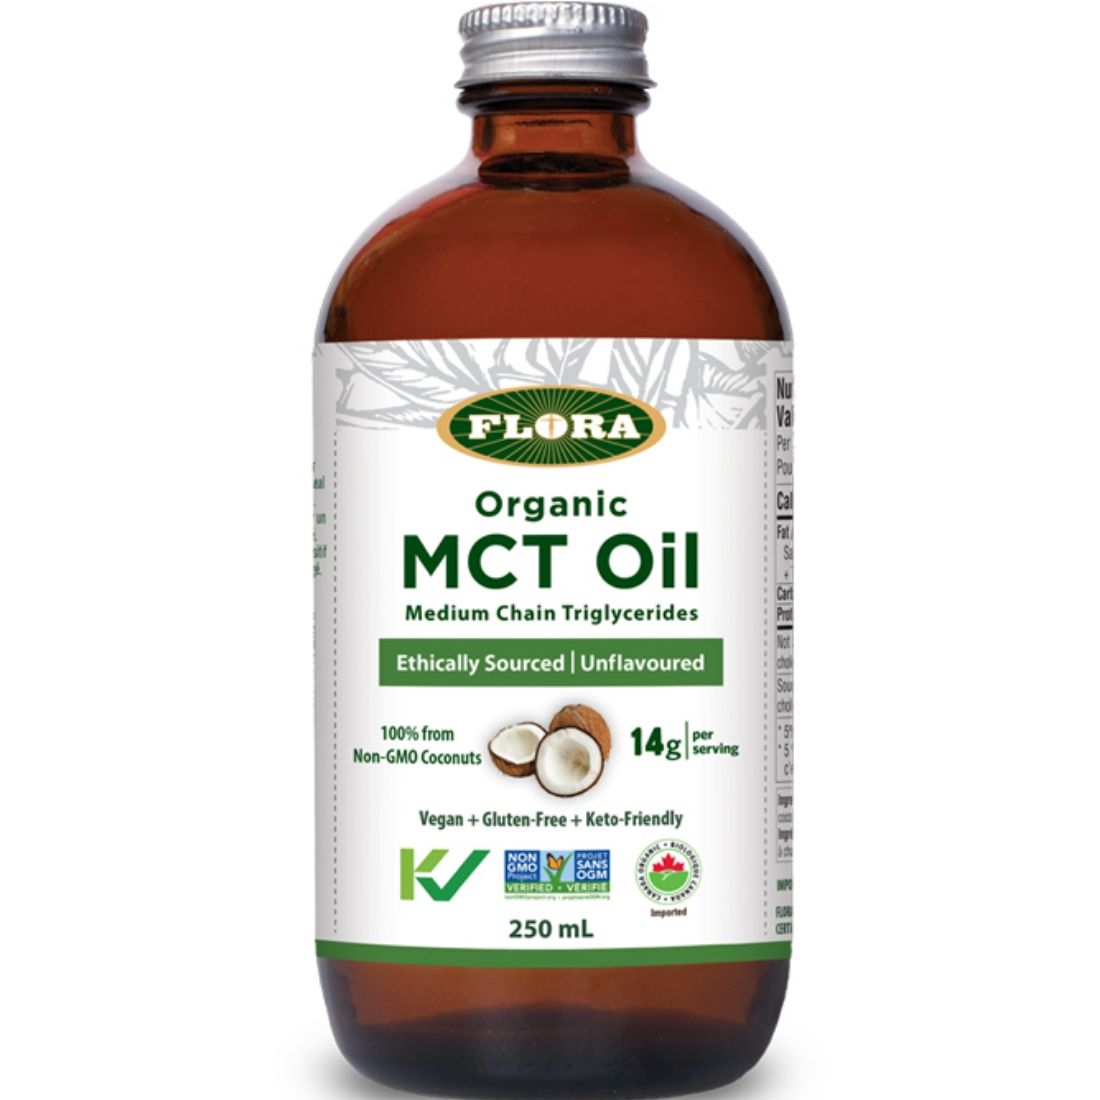 Flora Organic MCT Oil (Ethically Sourced Non-GMO Coconuts) (NEW!)